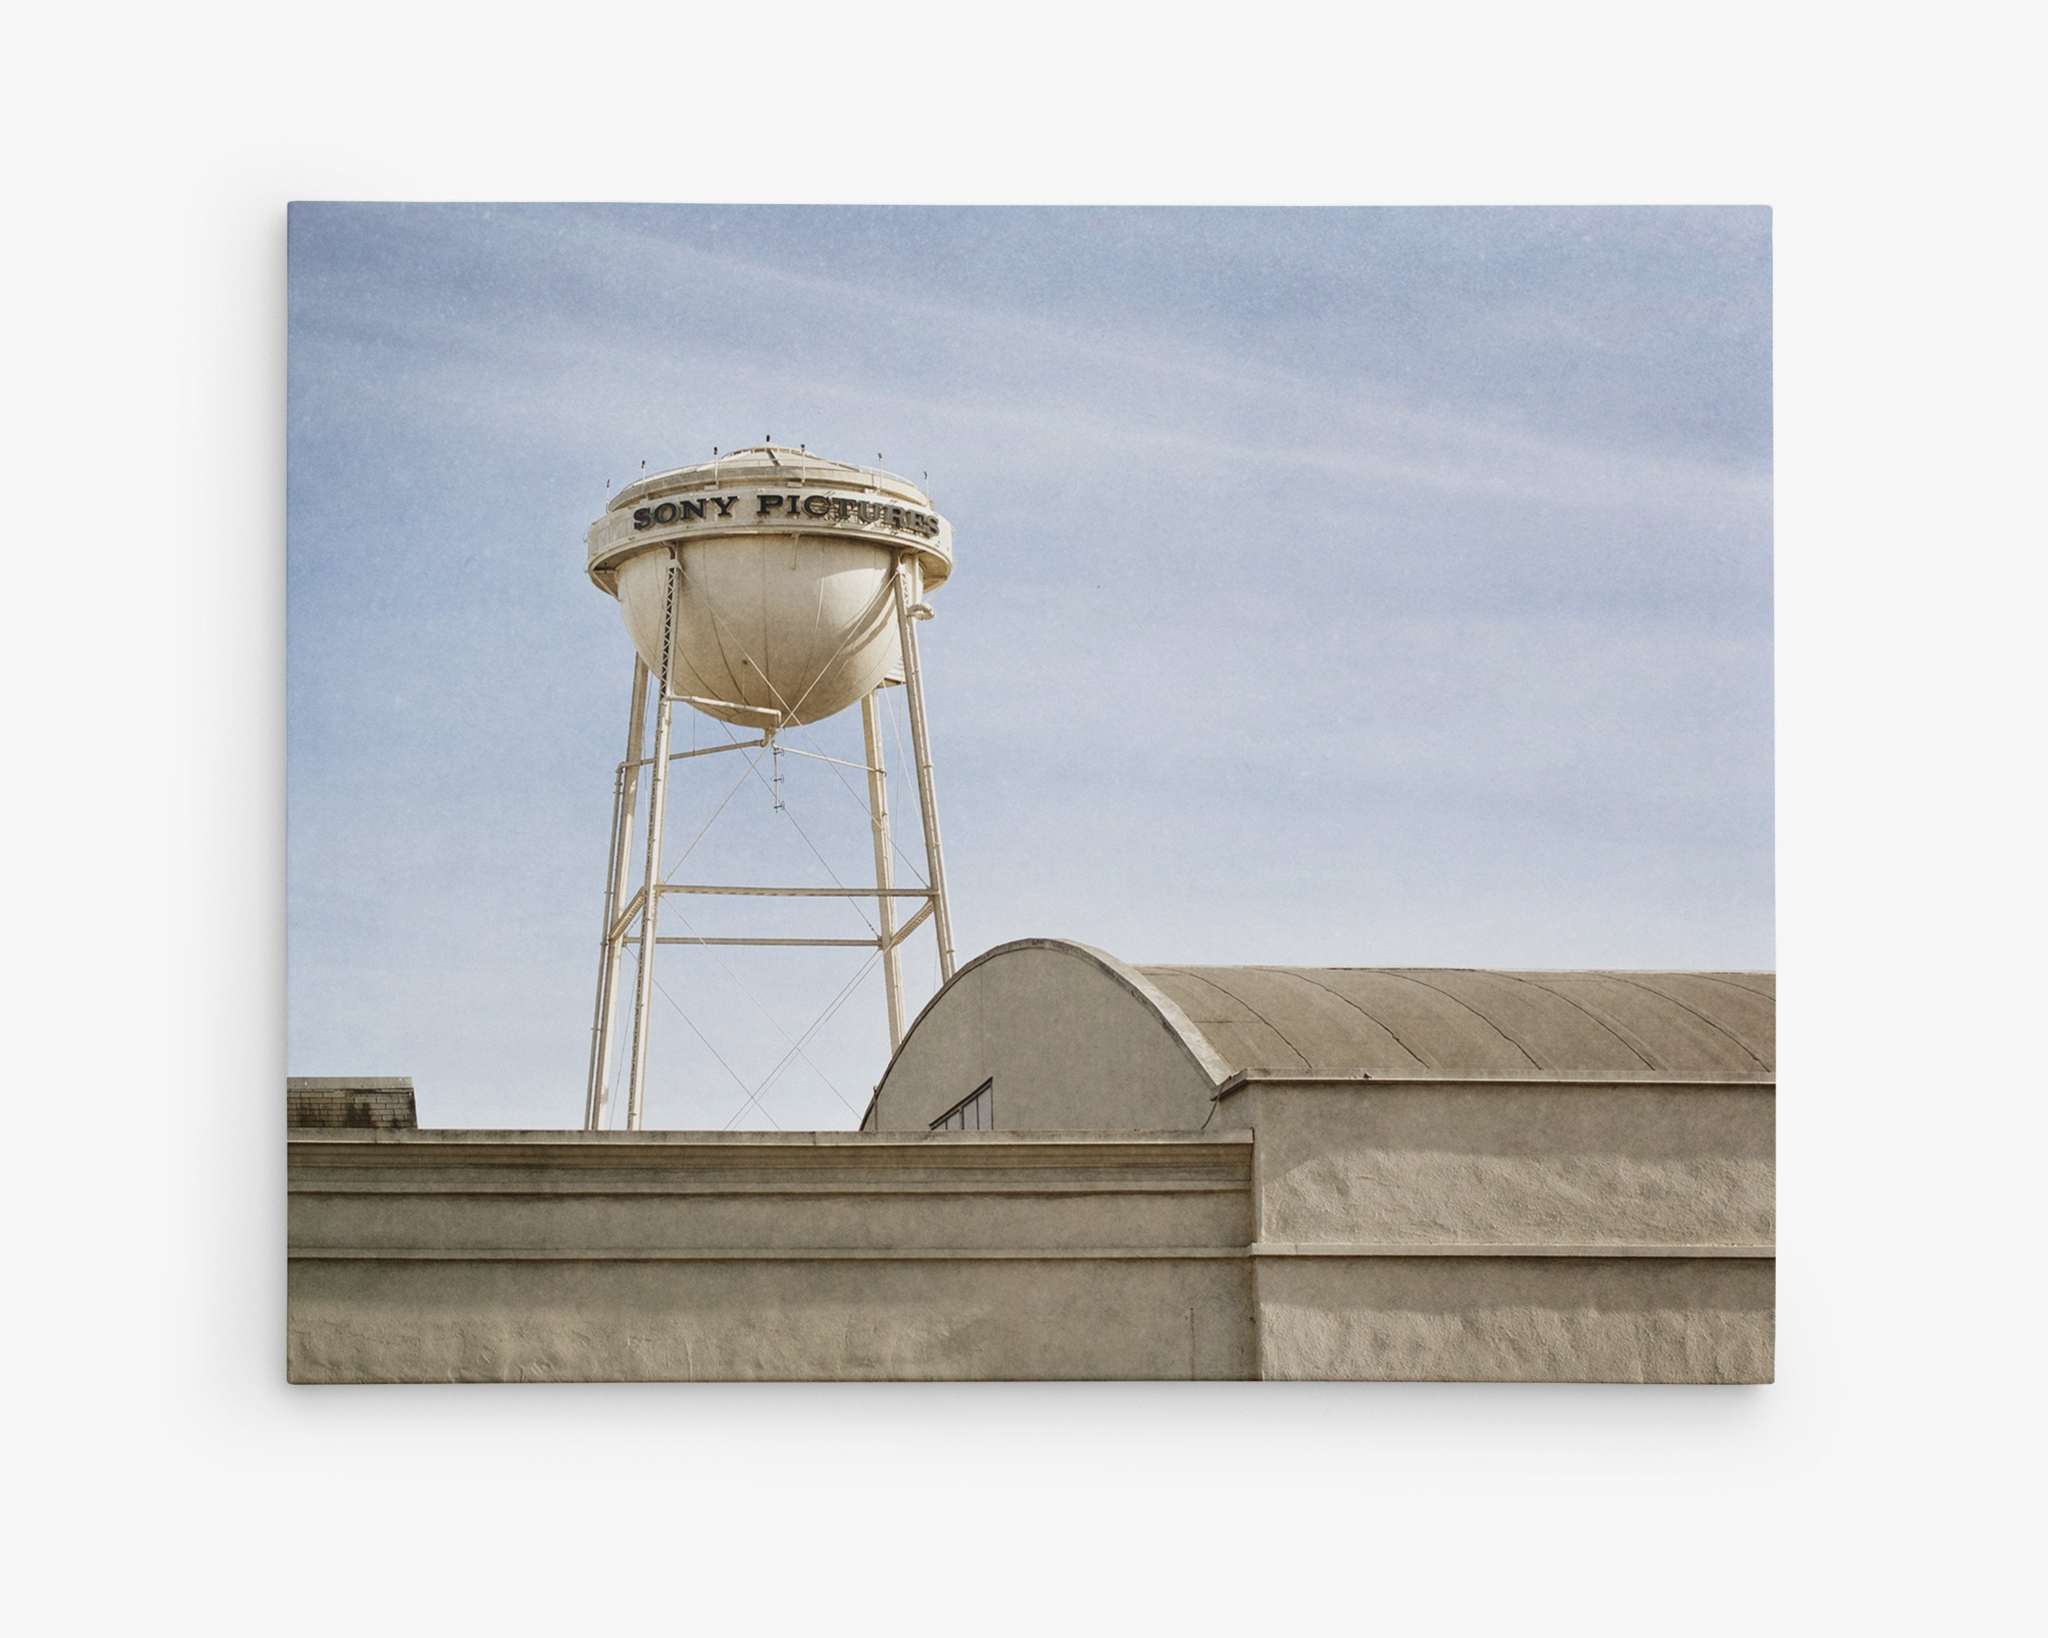 A tall water tower labeled "SONY PICTURES" rises above the surrounding buildings. Situated in an industrial area with lightly clouded skies, it resembles a Los Angeles Sony Pictures Studio Wall Art, 'Sony Lot' by Offley Green. The light gray, industrial-looking buildings in the foreground complete this cinematic view of Sony Studios.